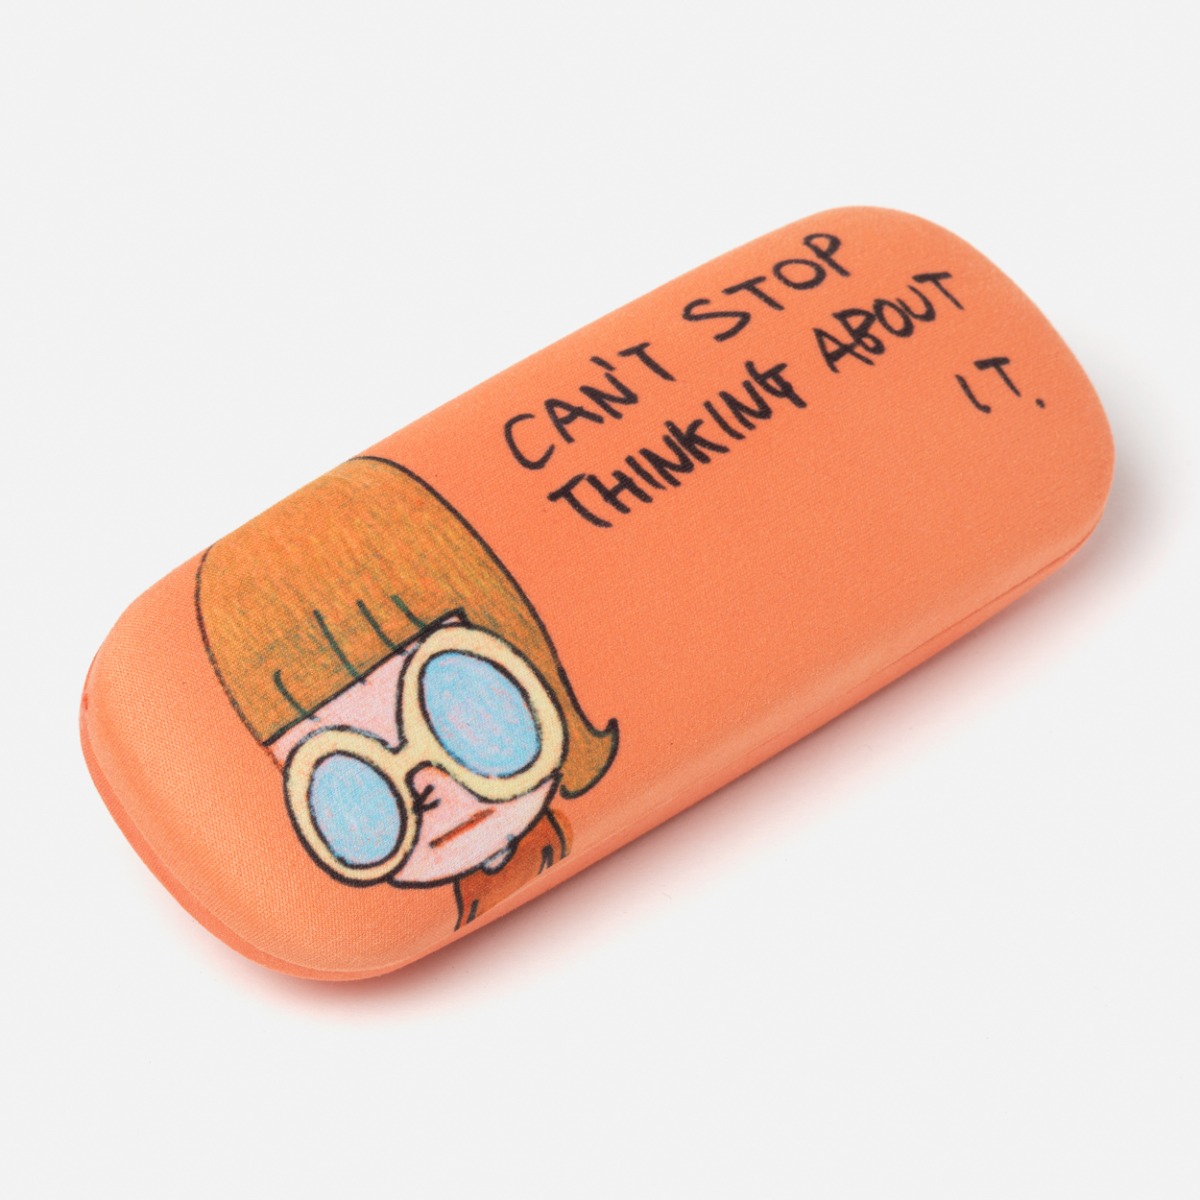 Estuche para gafas Can't Stop Thinking about It, 2011